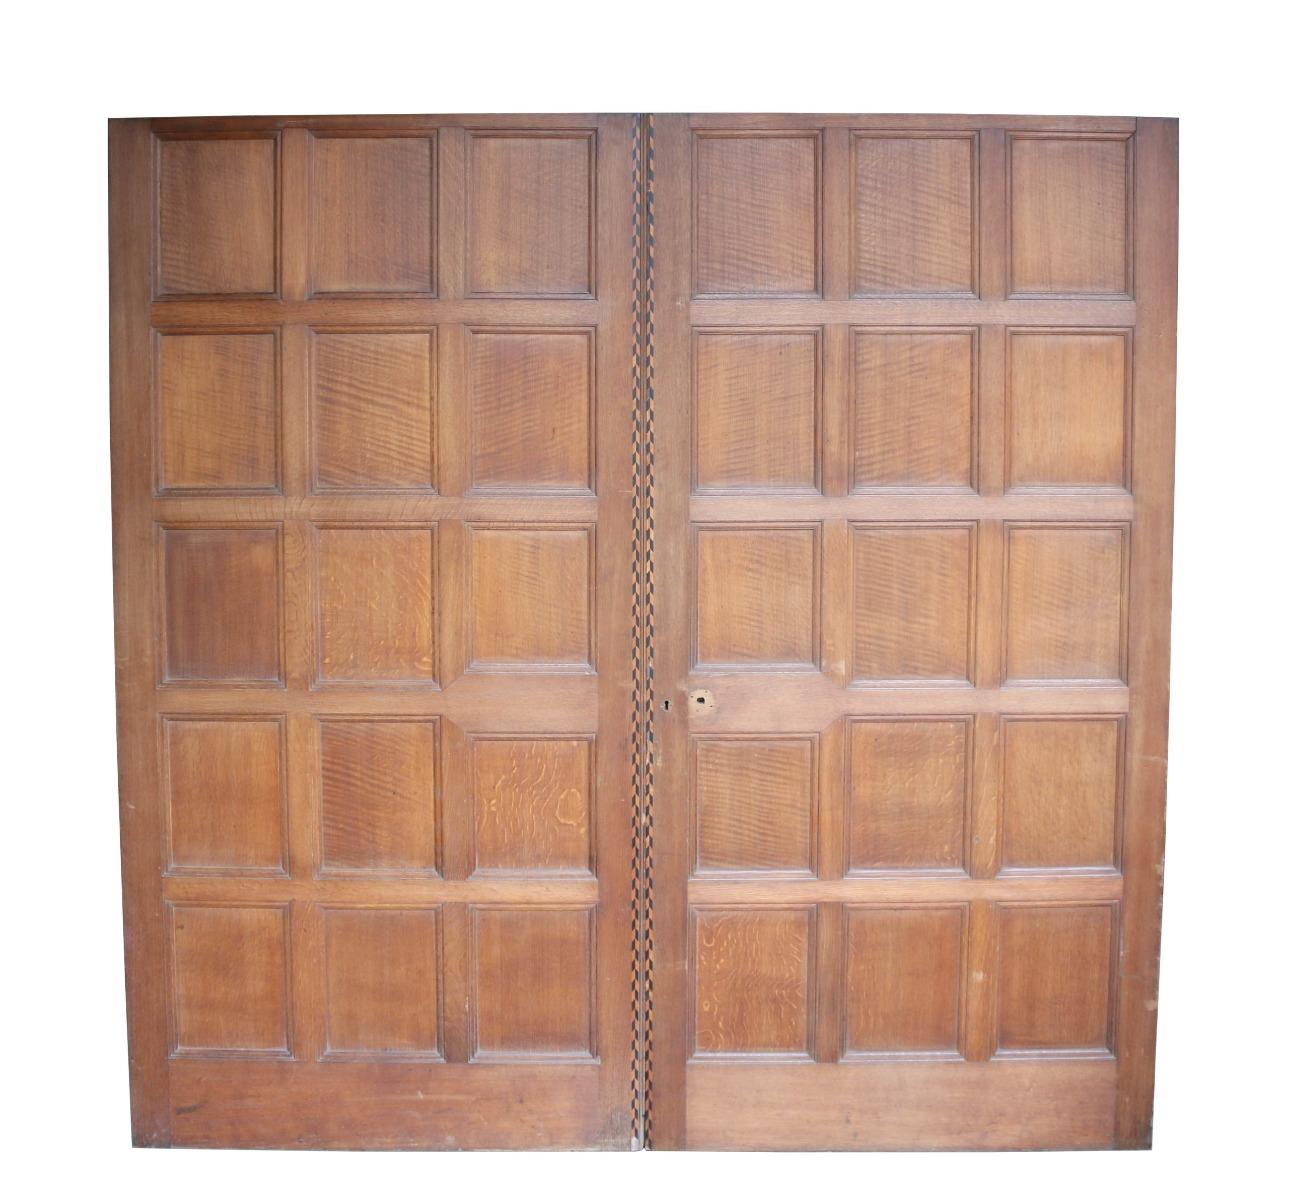 A set of reclaimed sliding or pocket doors, with part of the original mechanism still attached. These doors could be adapted for use with traditional butt hinges if required.